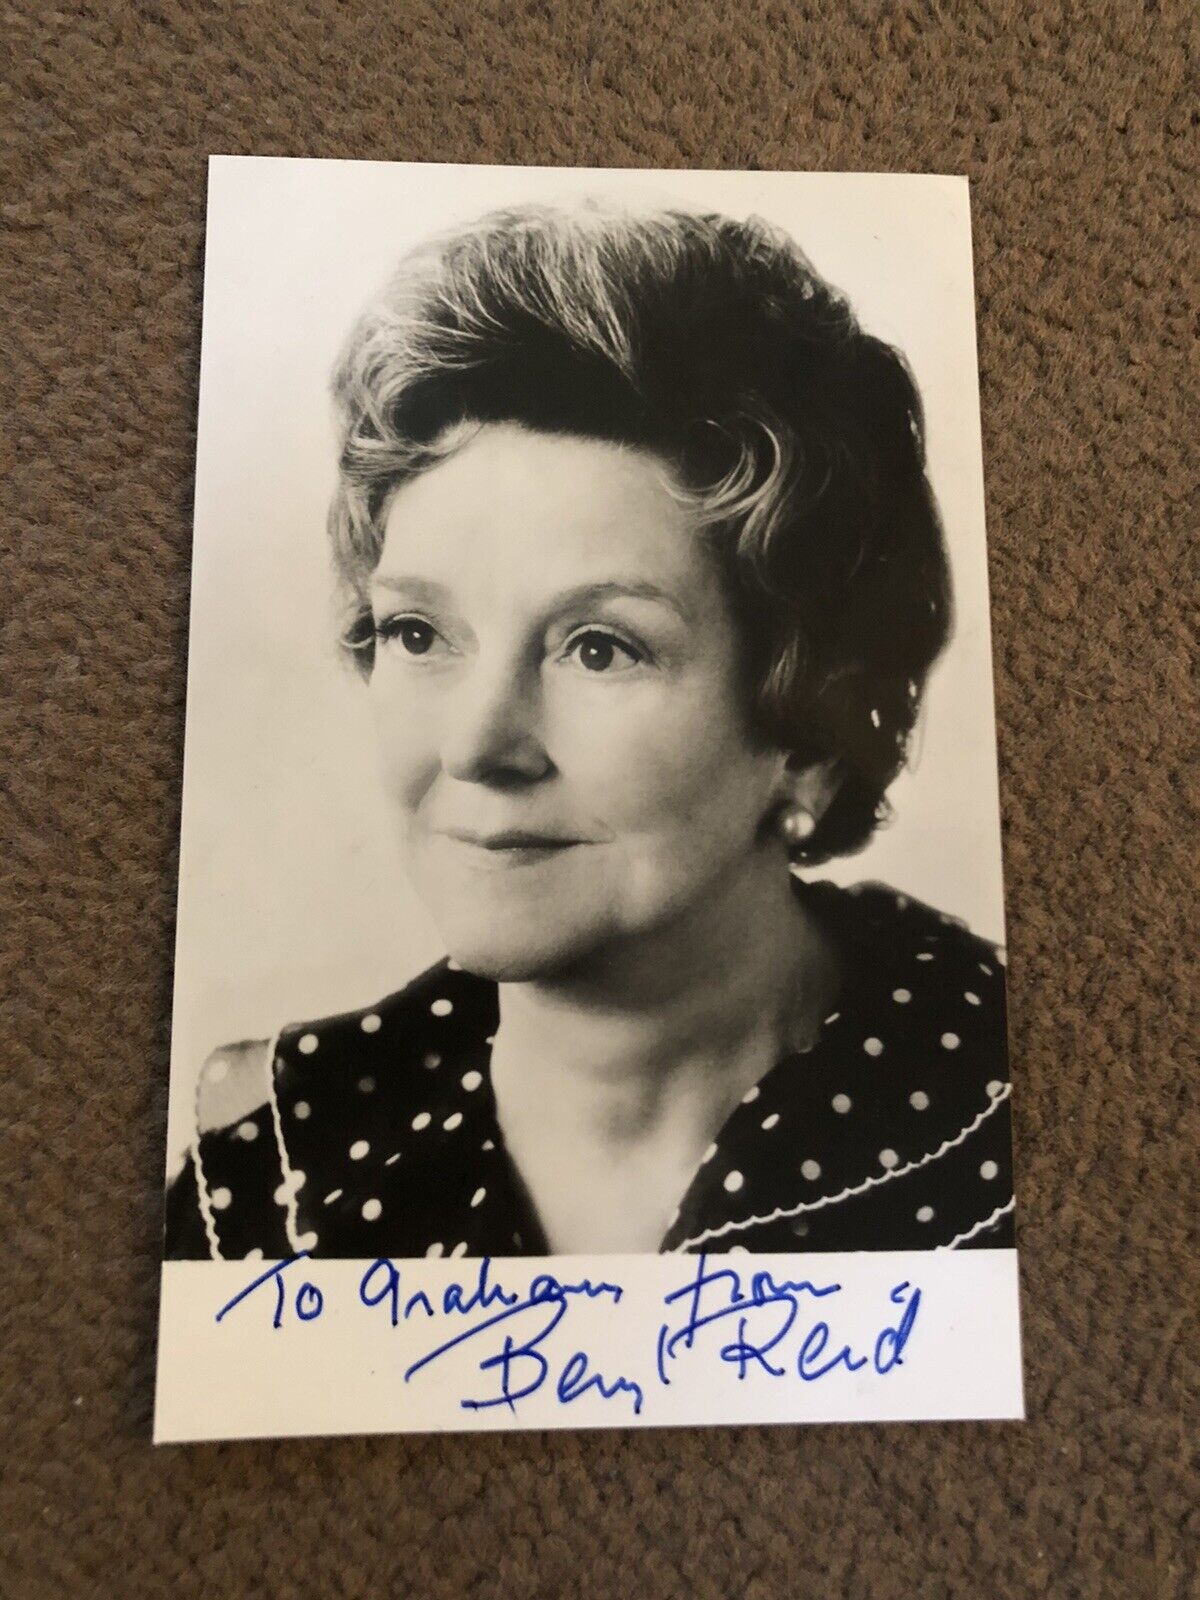 BERYL REID (ACTRESS) VINTAGE SIGNED Photo Poster painting